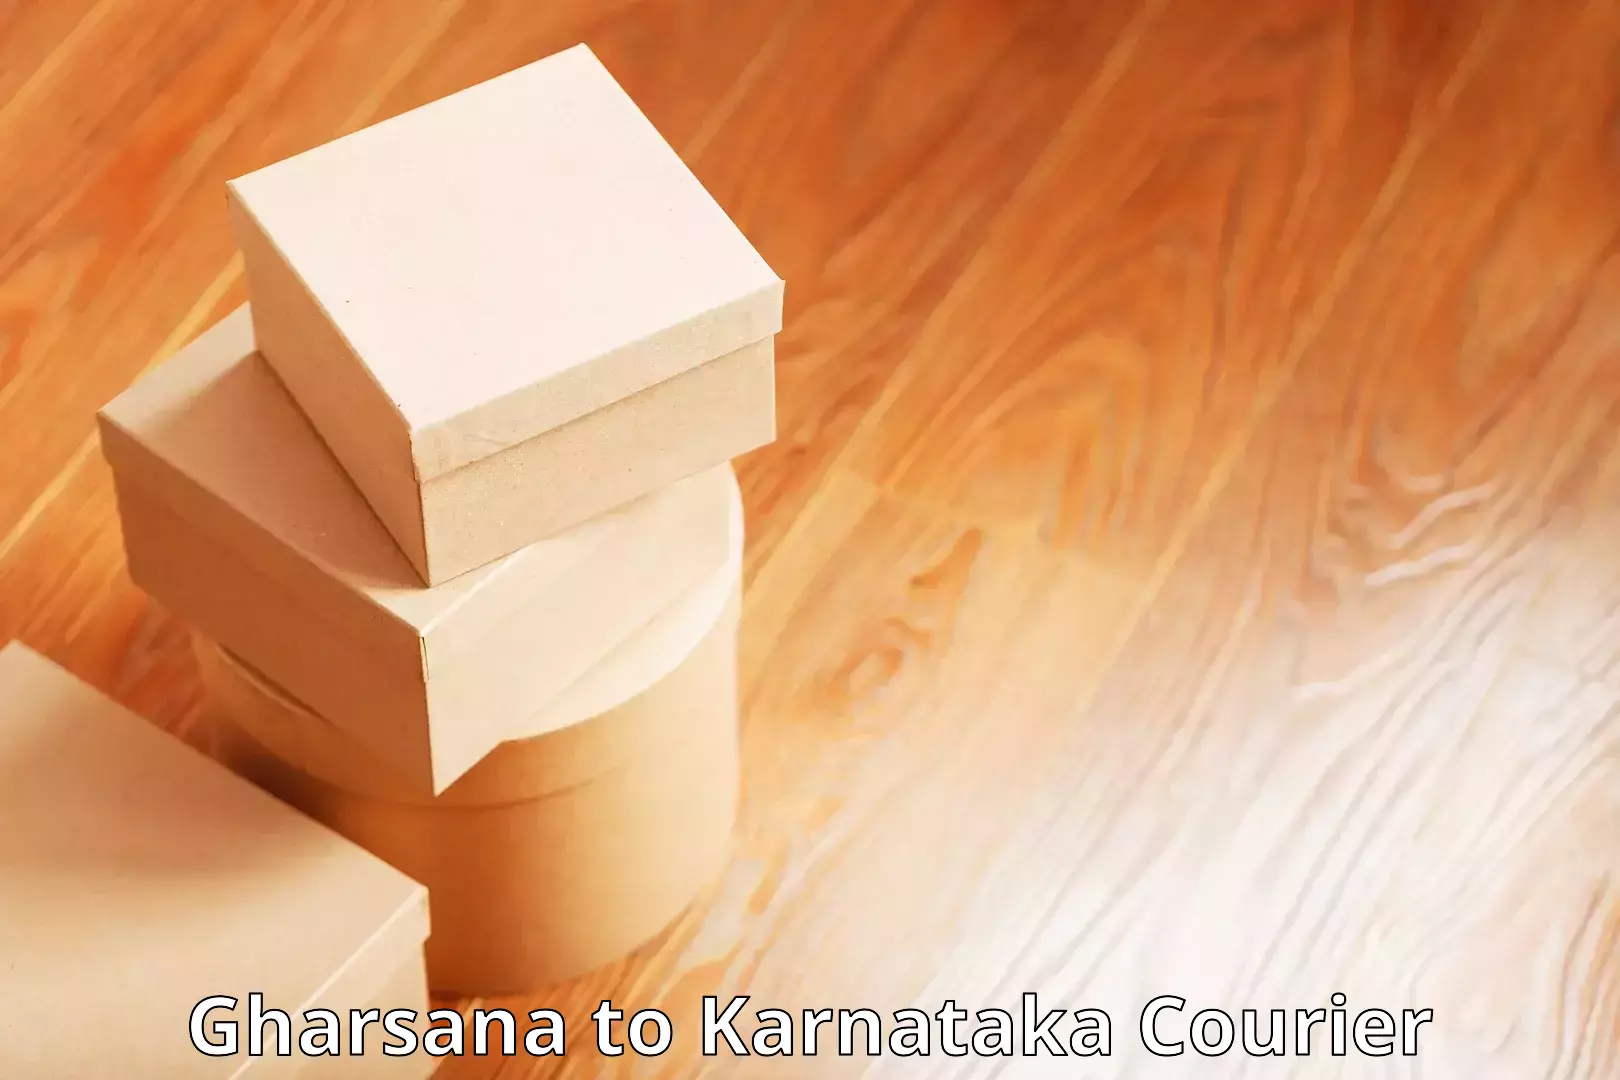 Easy access courier services in Gharsana to Karnataka